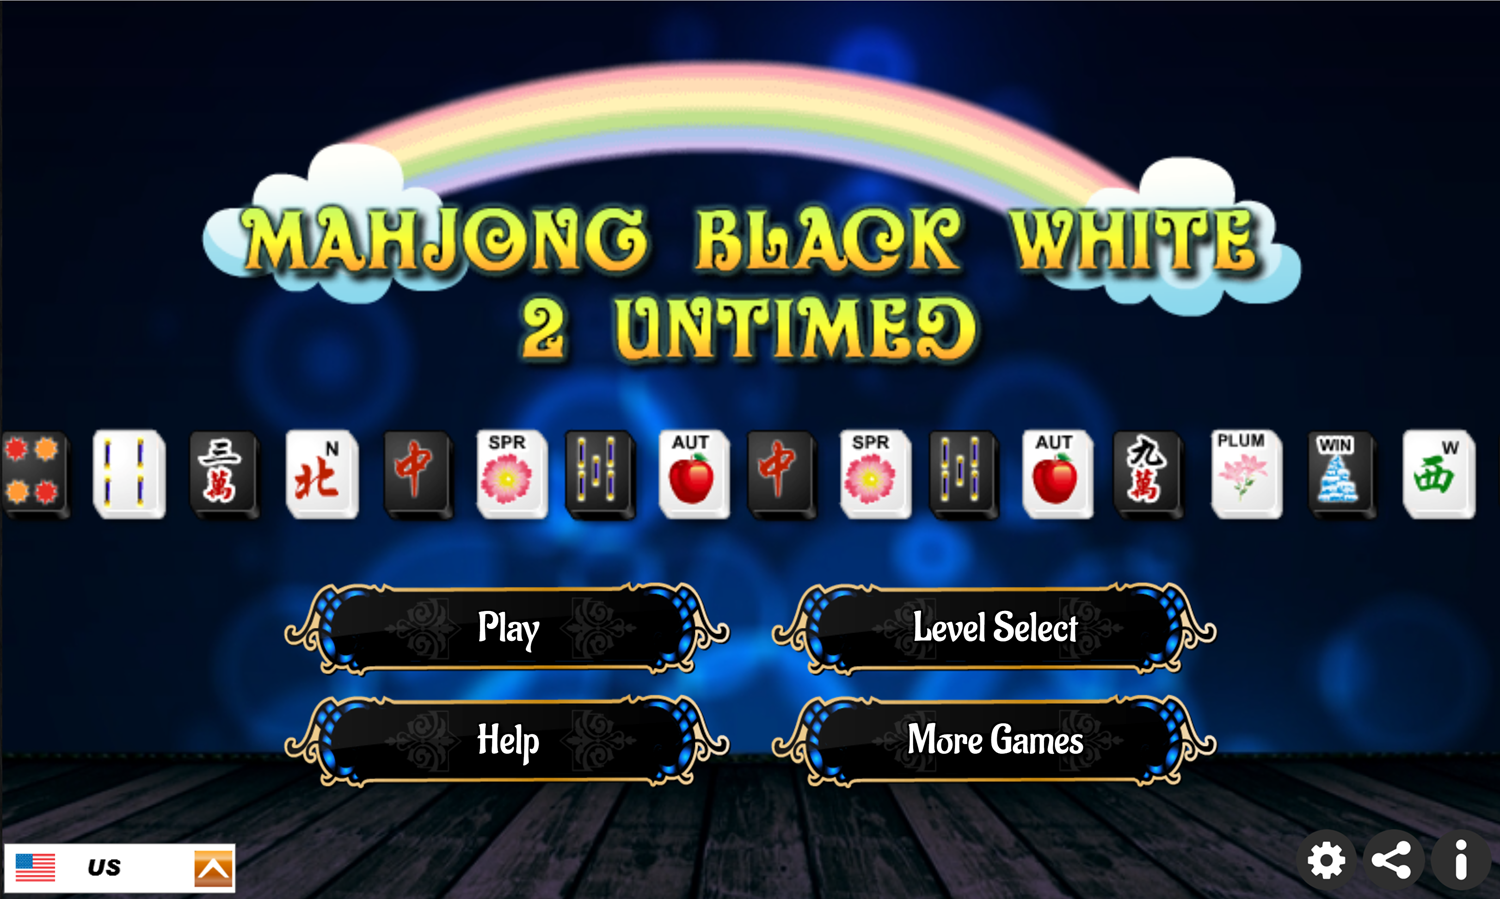 Mahjong Black and White 2 Untimed Game Welcome Screen Screenshot.